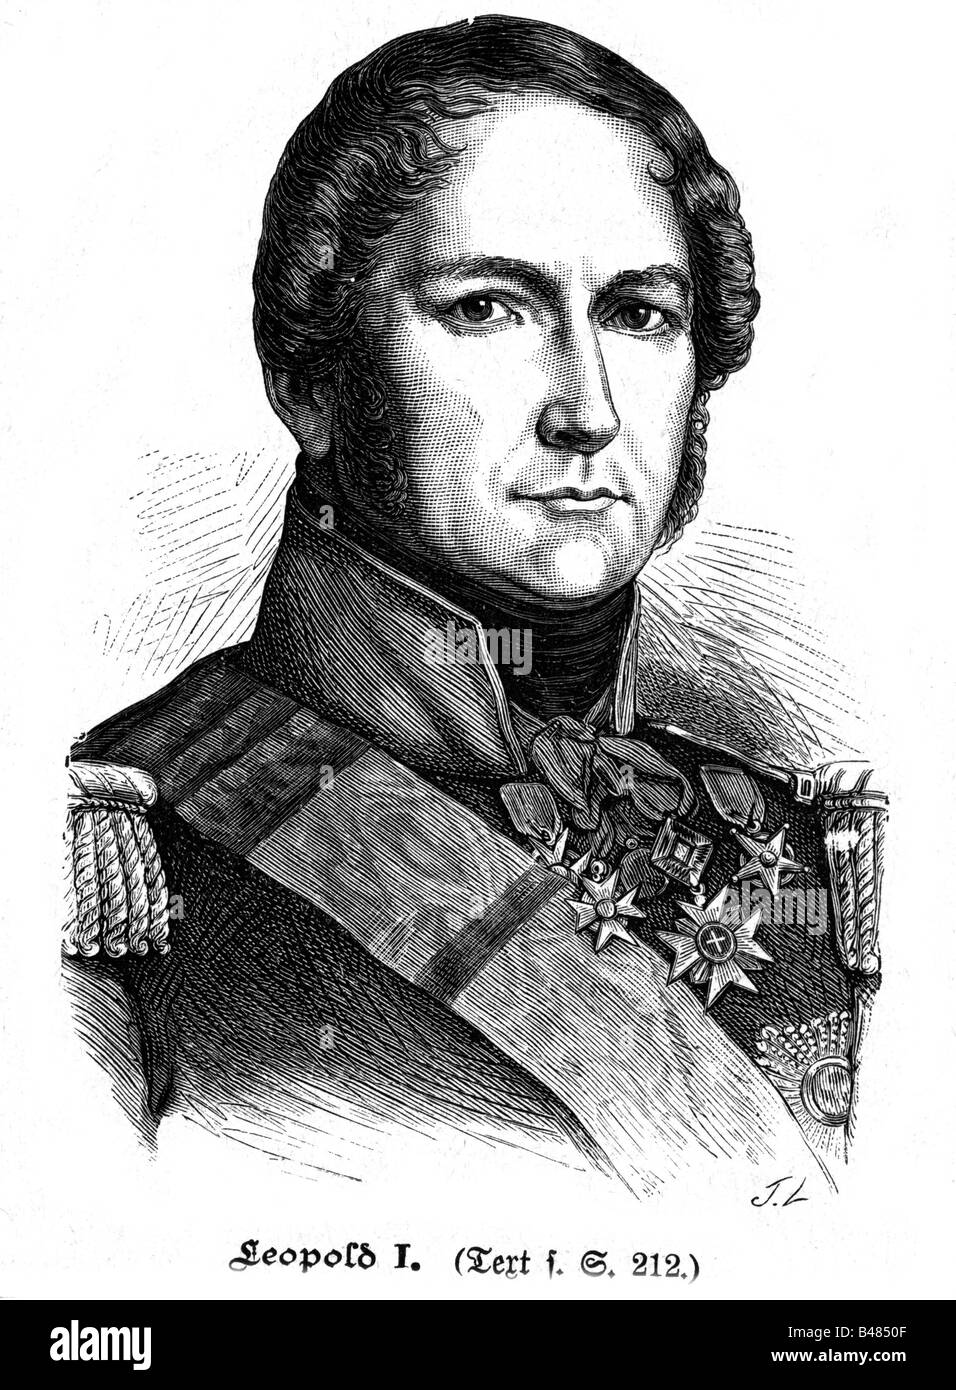 Leopold I., 16.12.1790 - 10.12.1865, King of the Belgians 31.7.1831 - 16.12.1865, portrait, wood engraving, 19th century, Stock Photo